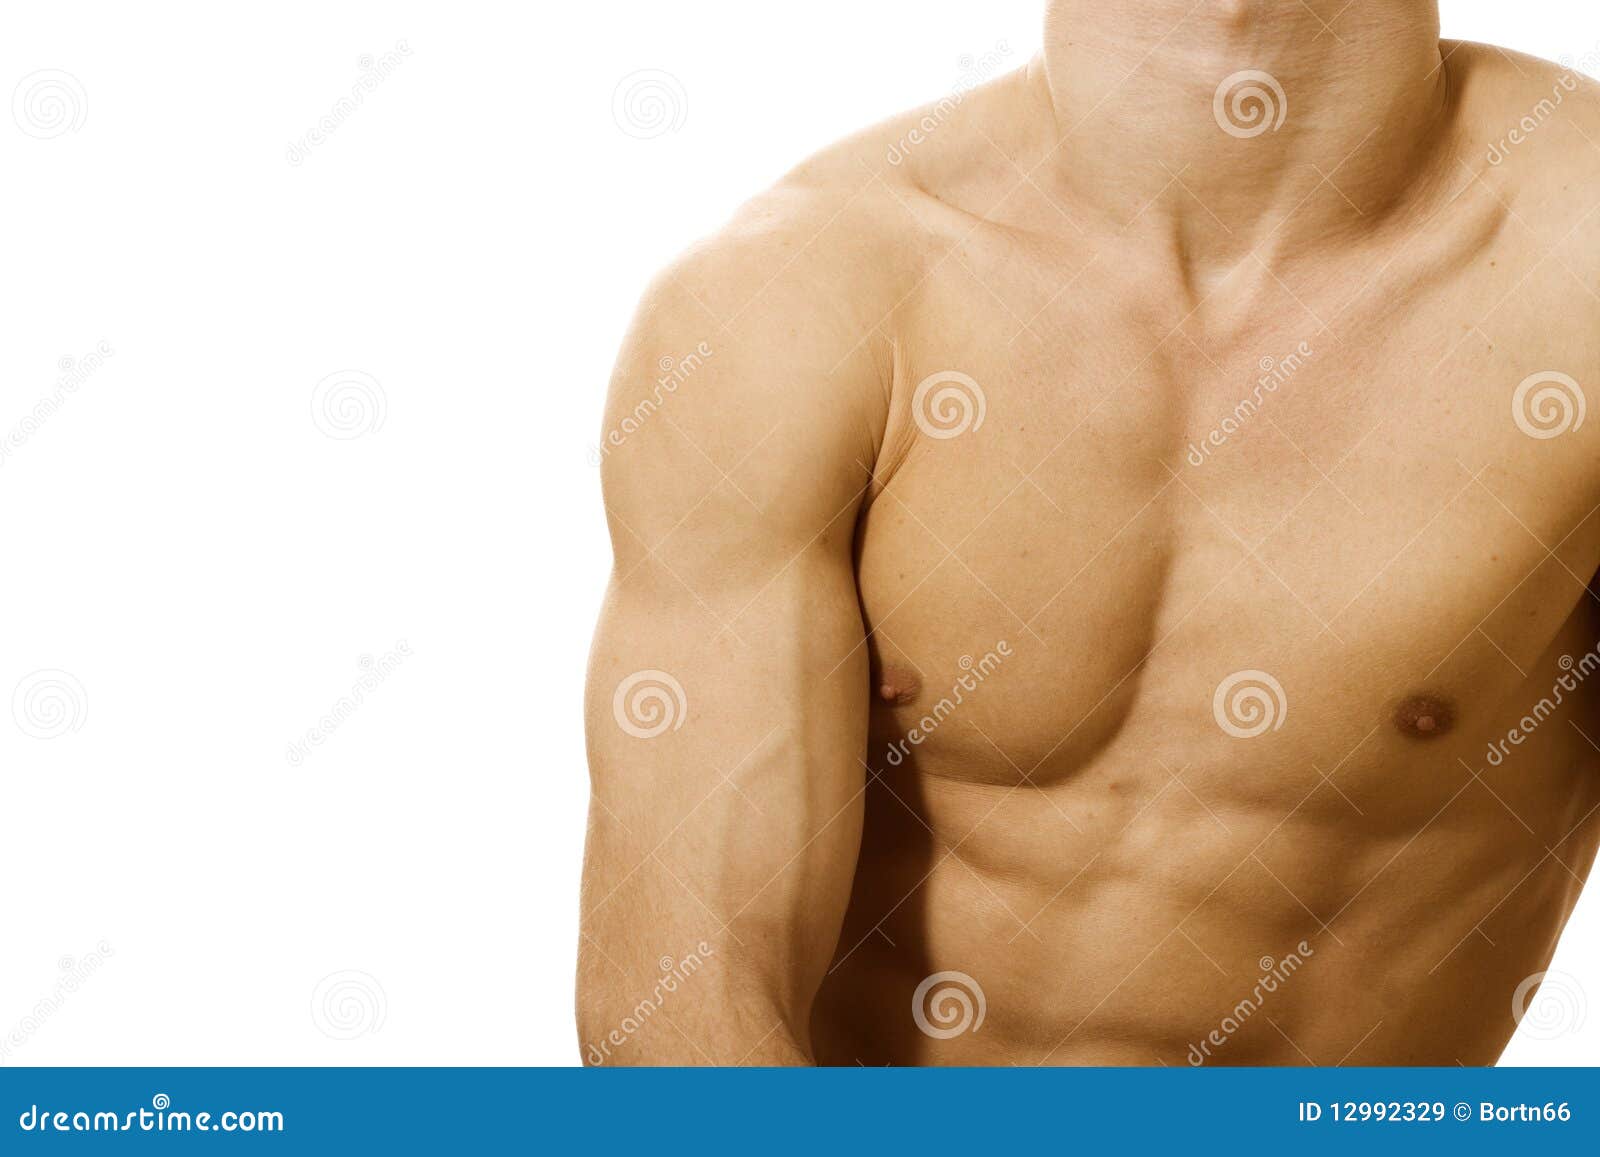 Body part stock image. Image of color, lifestyle, muscle - 12992329